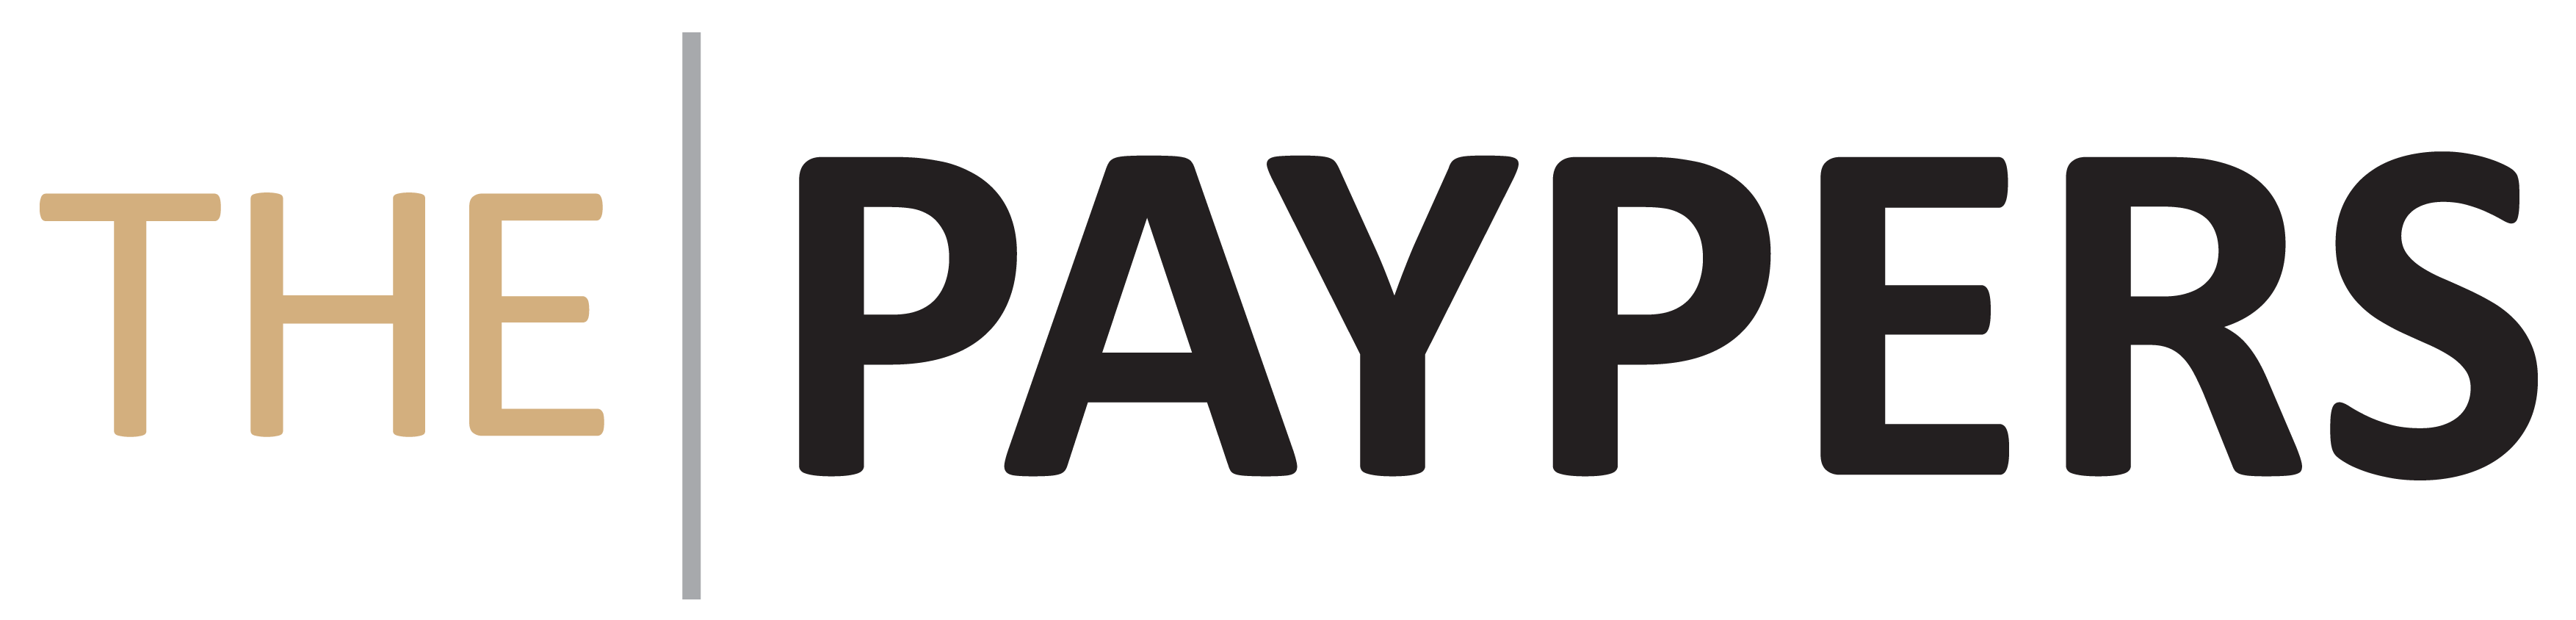 The Paypers Publication Logo